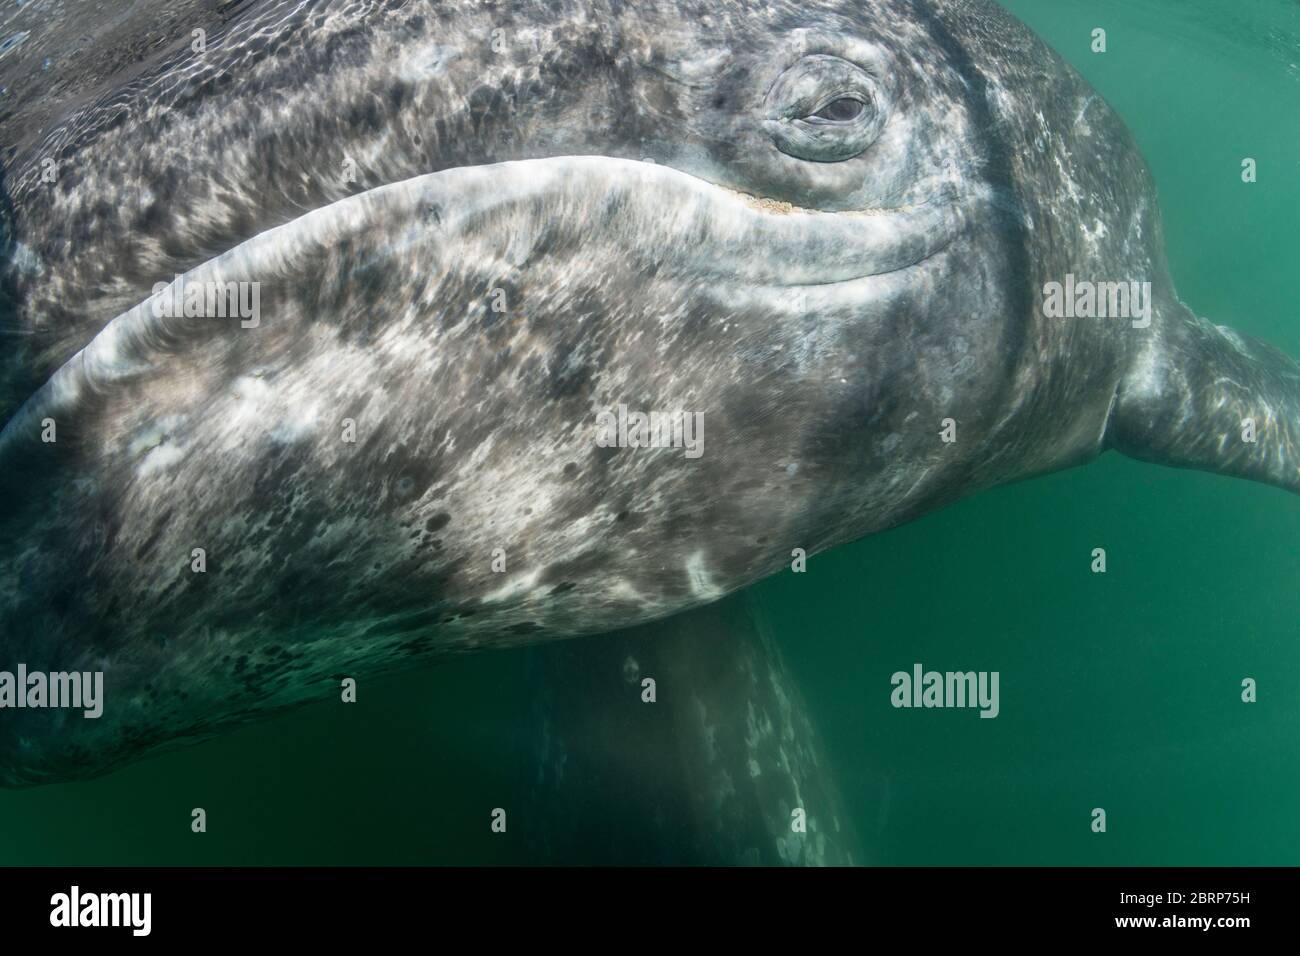 gray whale calf, Eschrichtius robustus, San Ignacio Lagoon, Baja, Mexico; whale lice (amphipods) are visible along the lower jaw below the eye Stock Photo